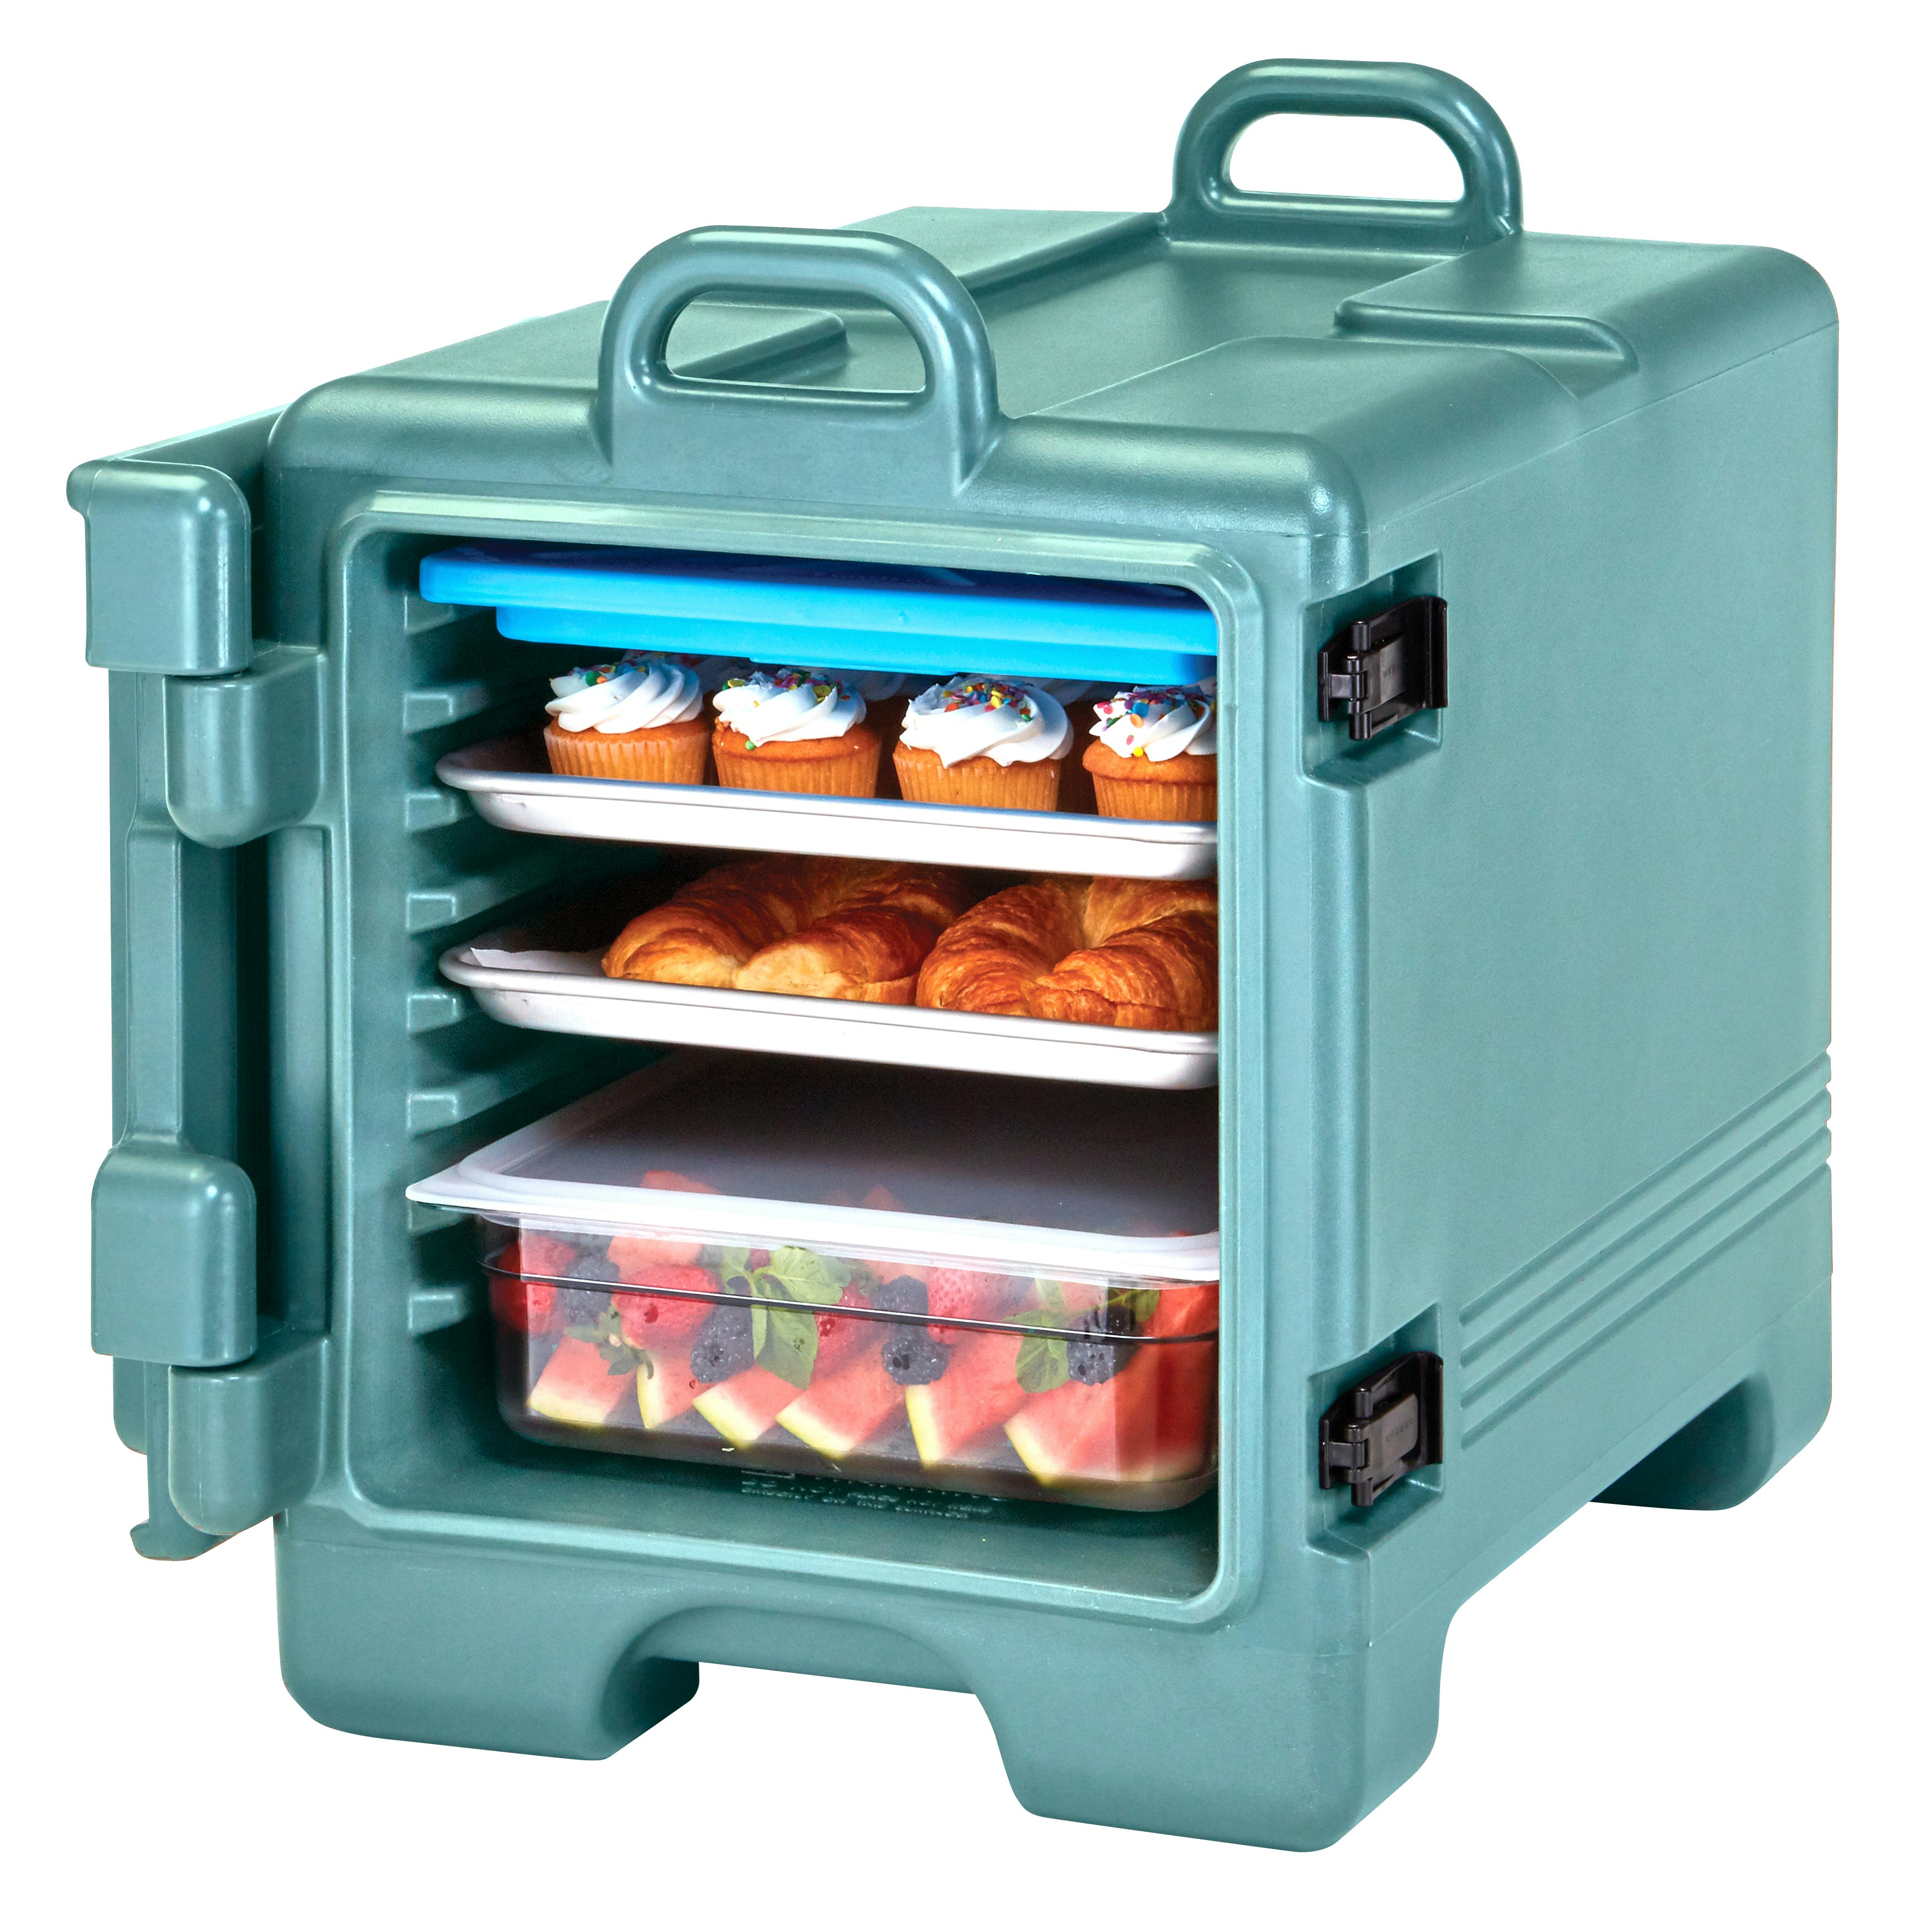 Insulated Food Carrier, Thermal Food Container, Insulated Beverage Dispenser